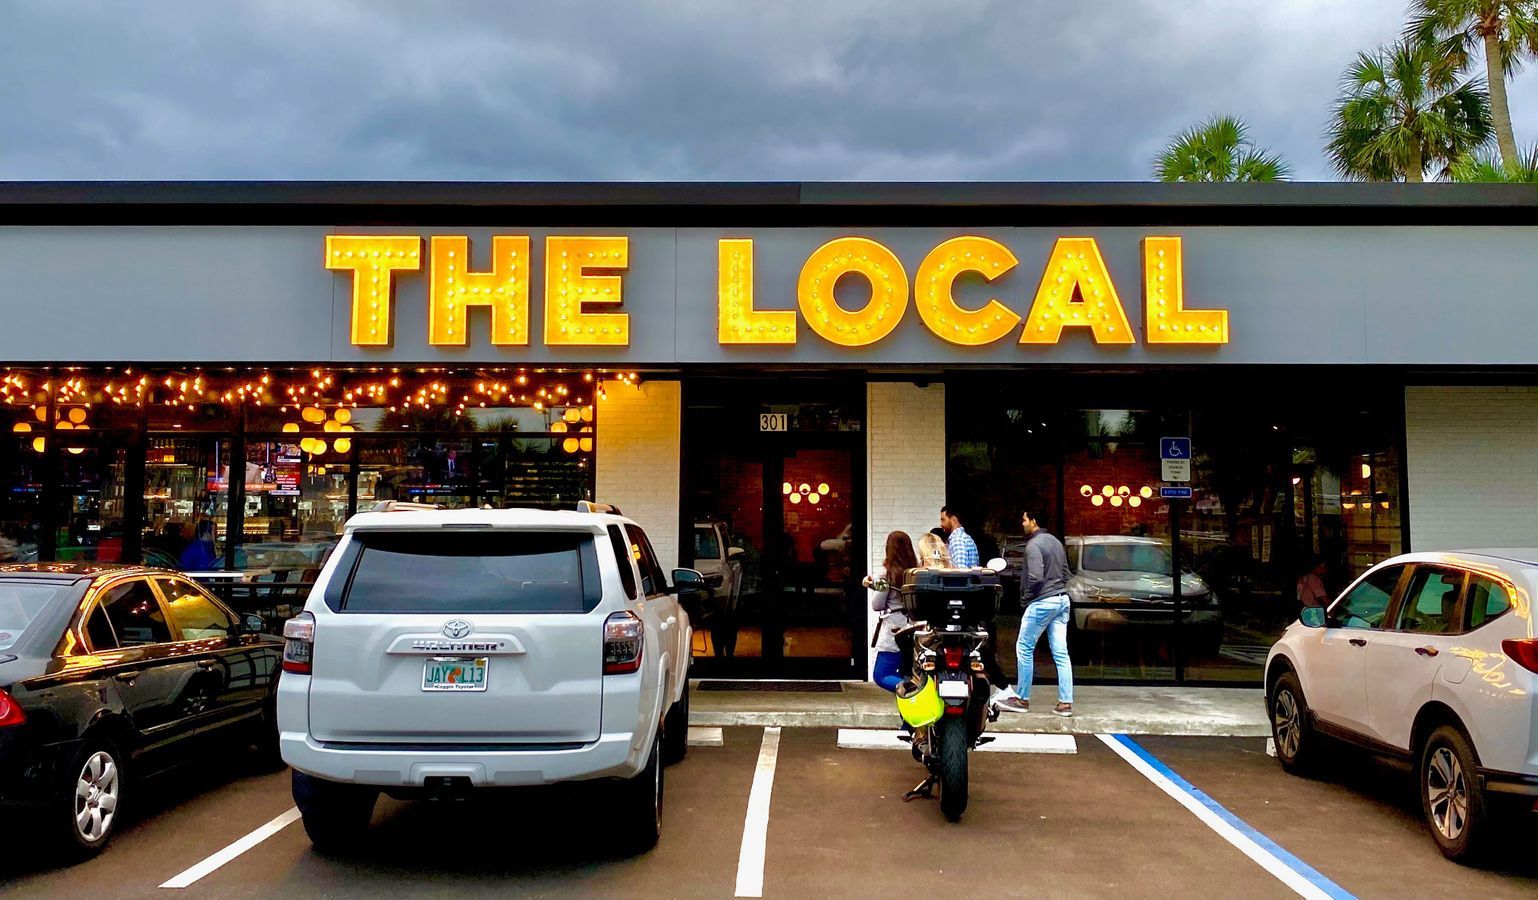 The local